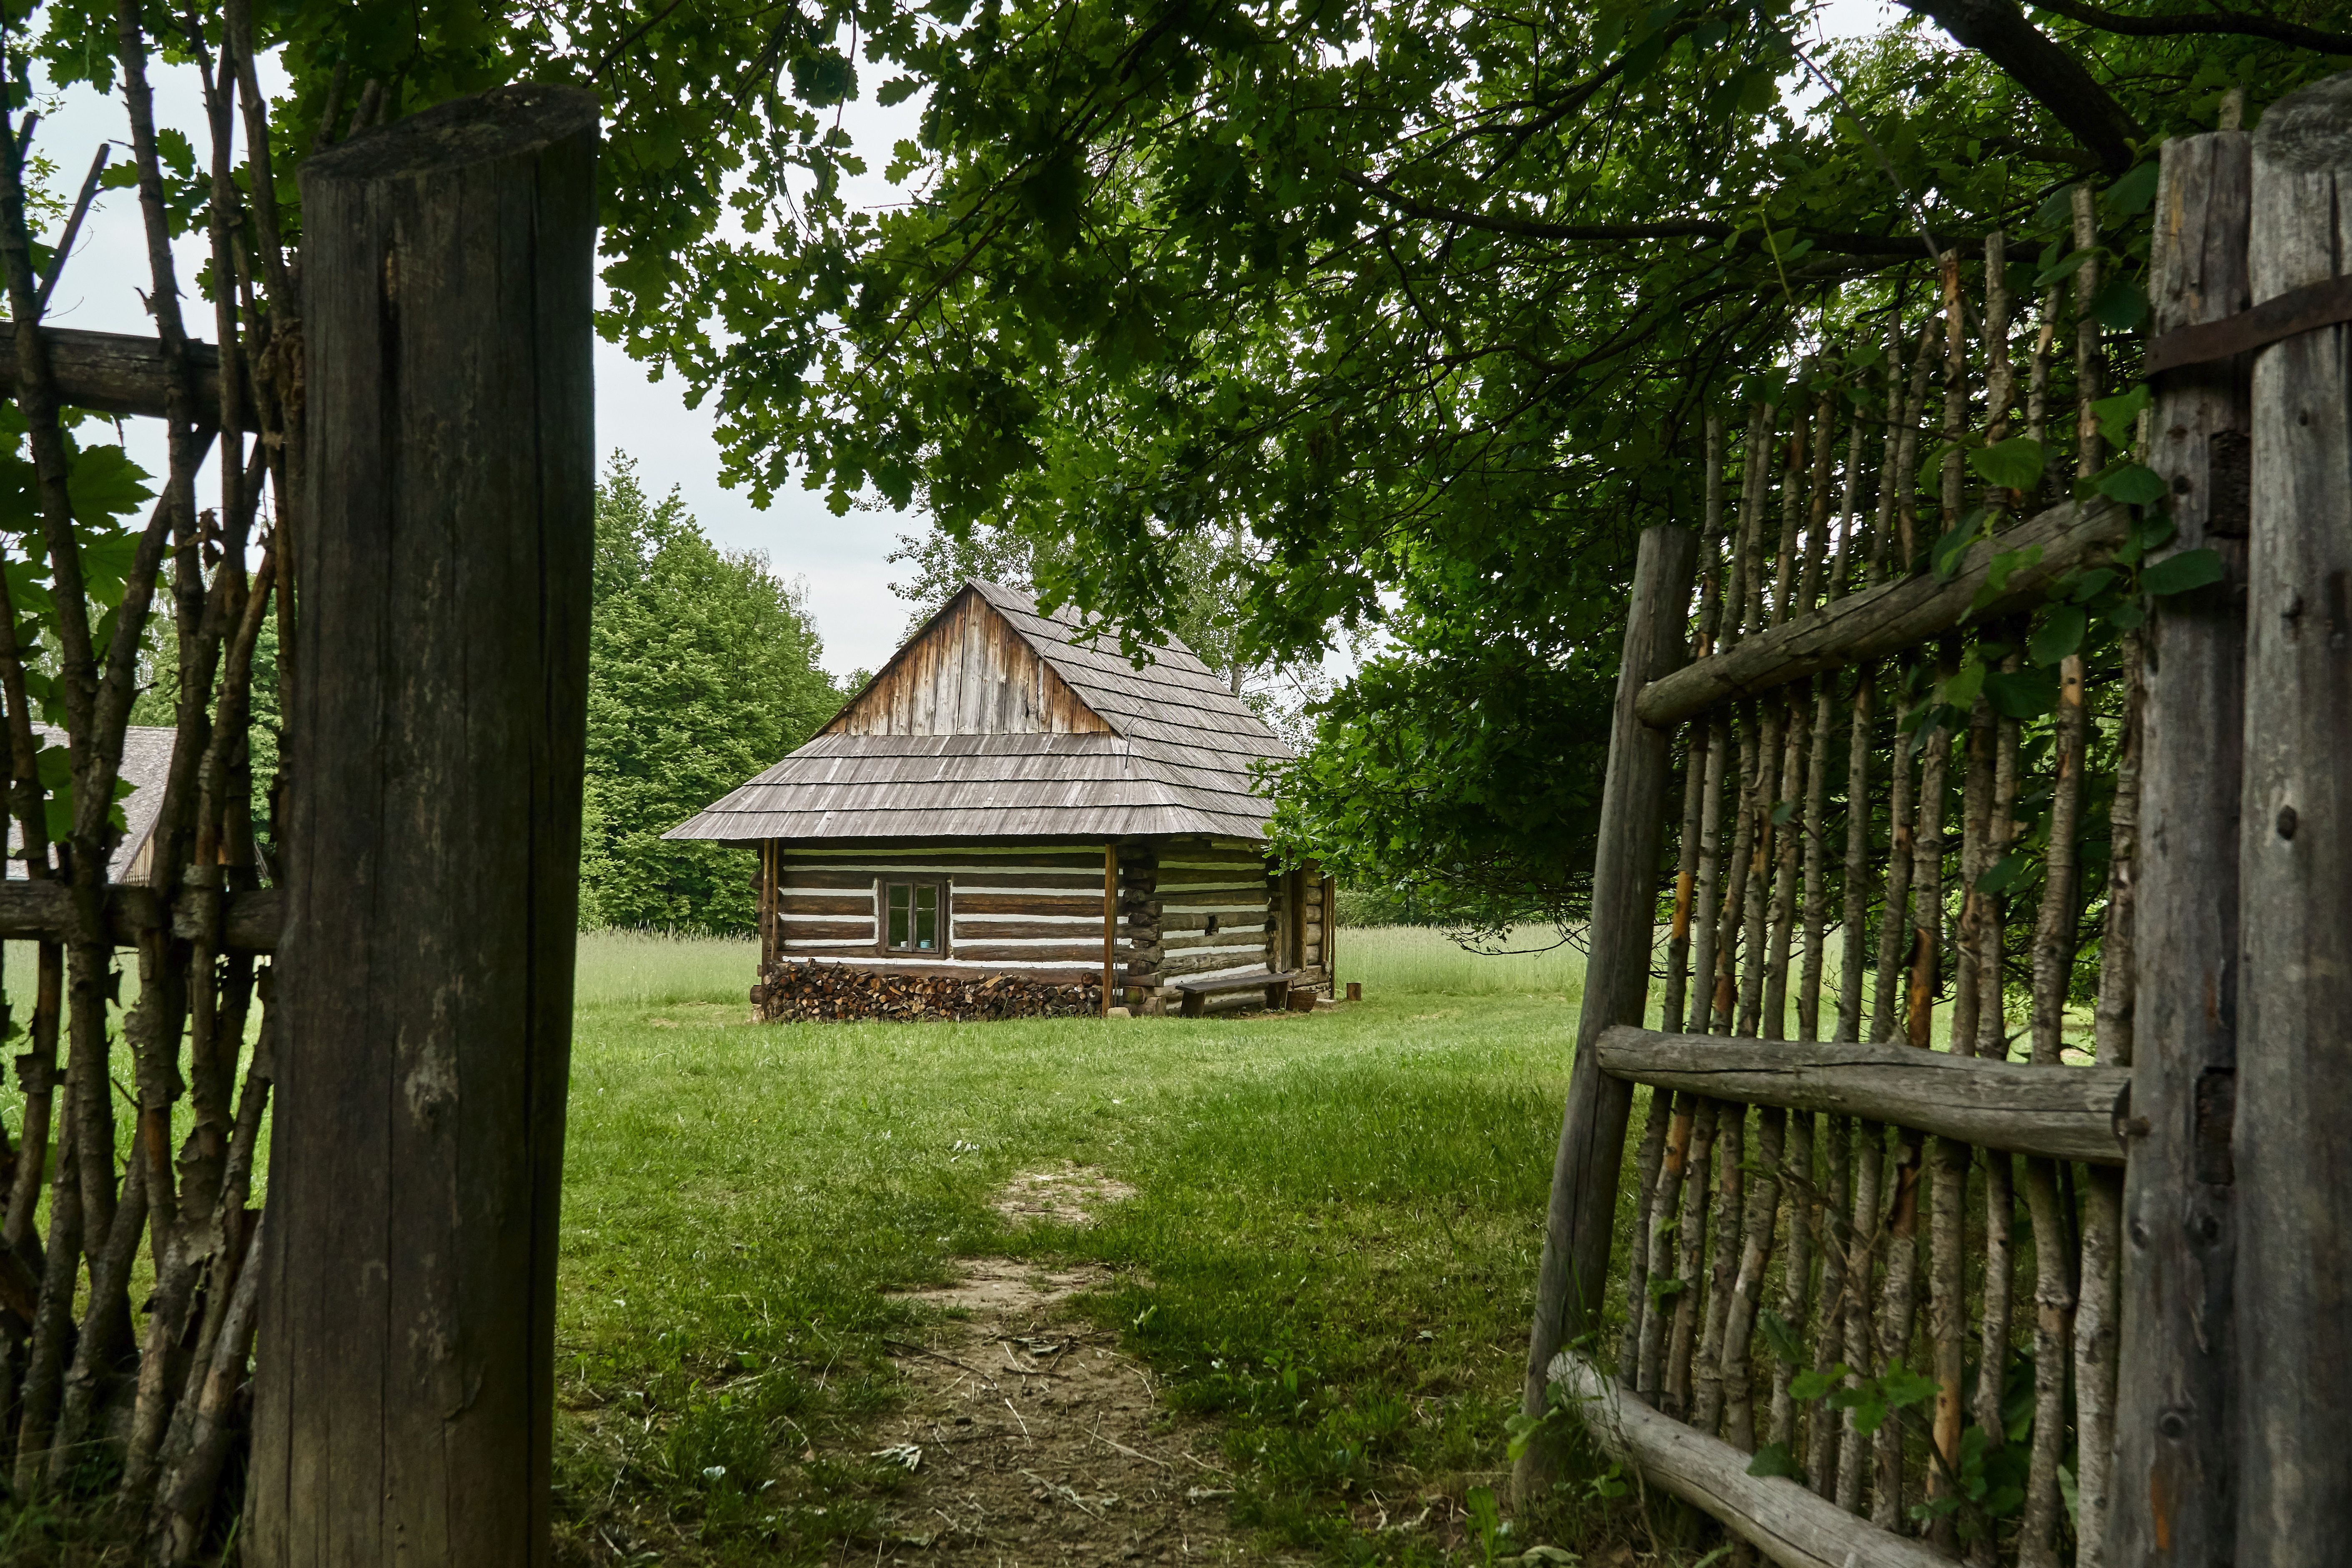 A wooden cottage in an open-air museum